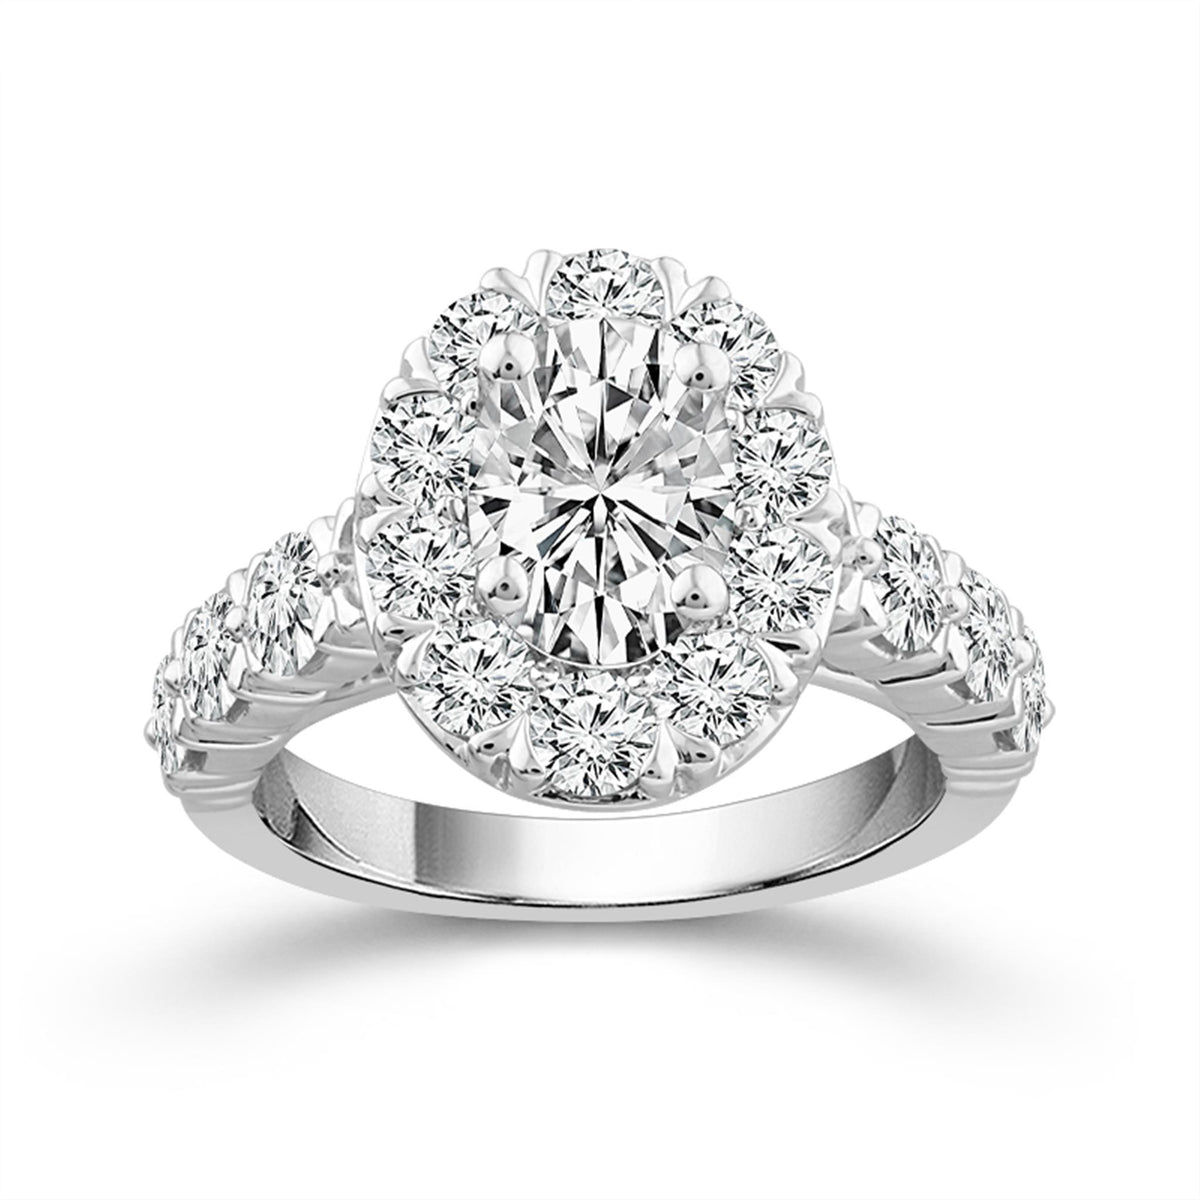 14Kt White Gold Halo Engagement Ring With 0.75ct Natural Center Diamond